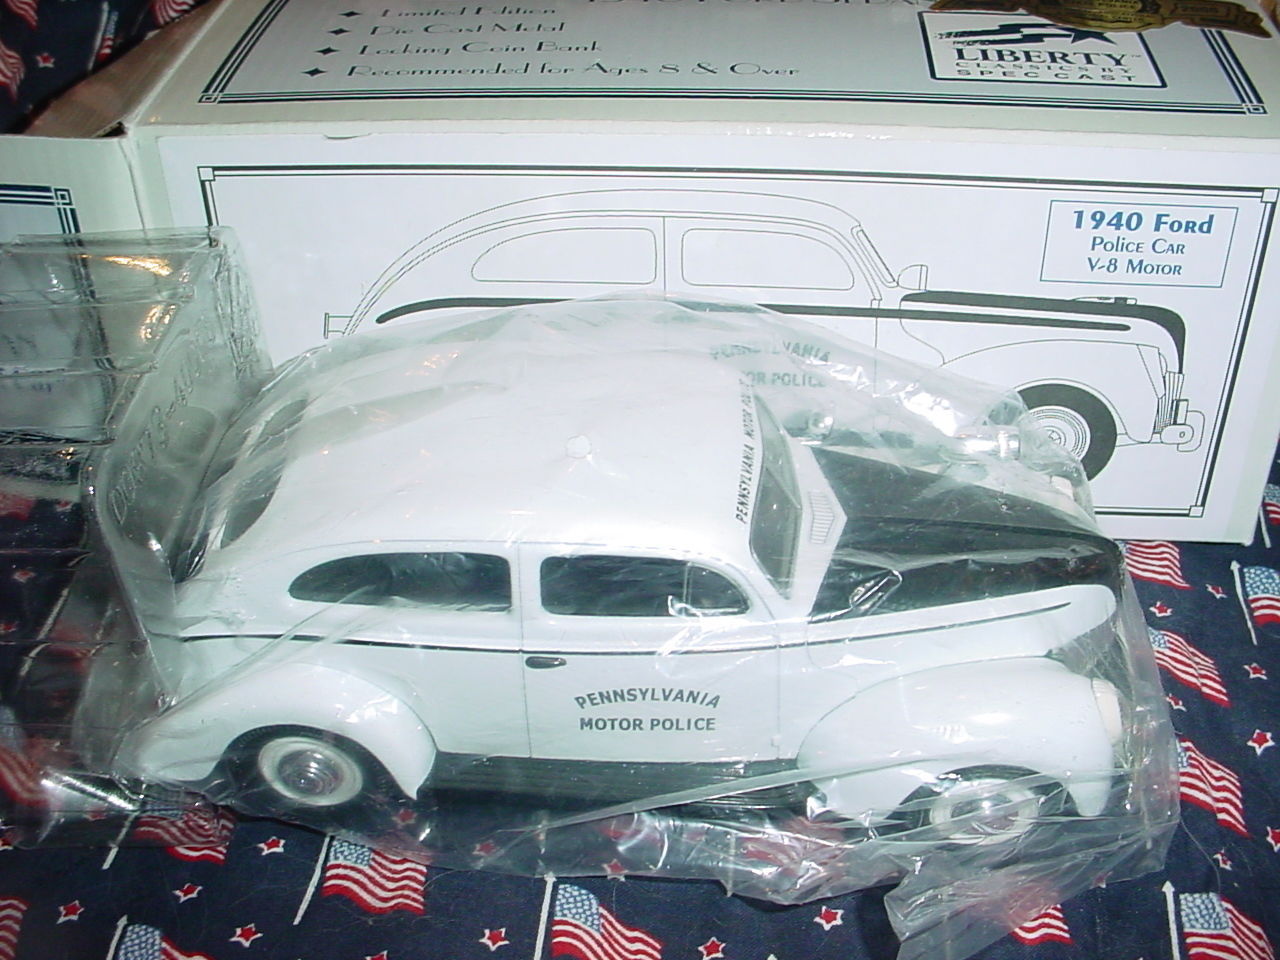 PA MOTOR POLICE 1940 FORD GHOST CAR 2000 LIMITED EDITION BANK FREE USA SHIPPING - $64.34